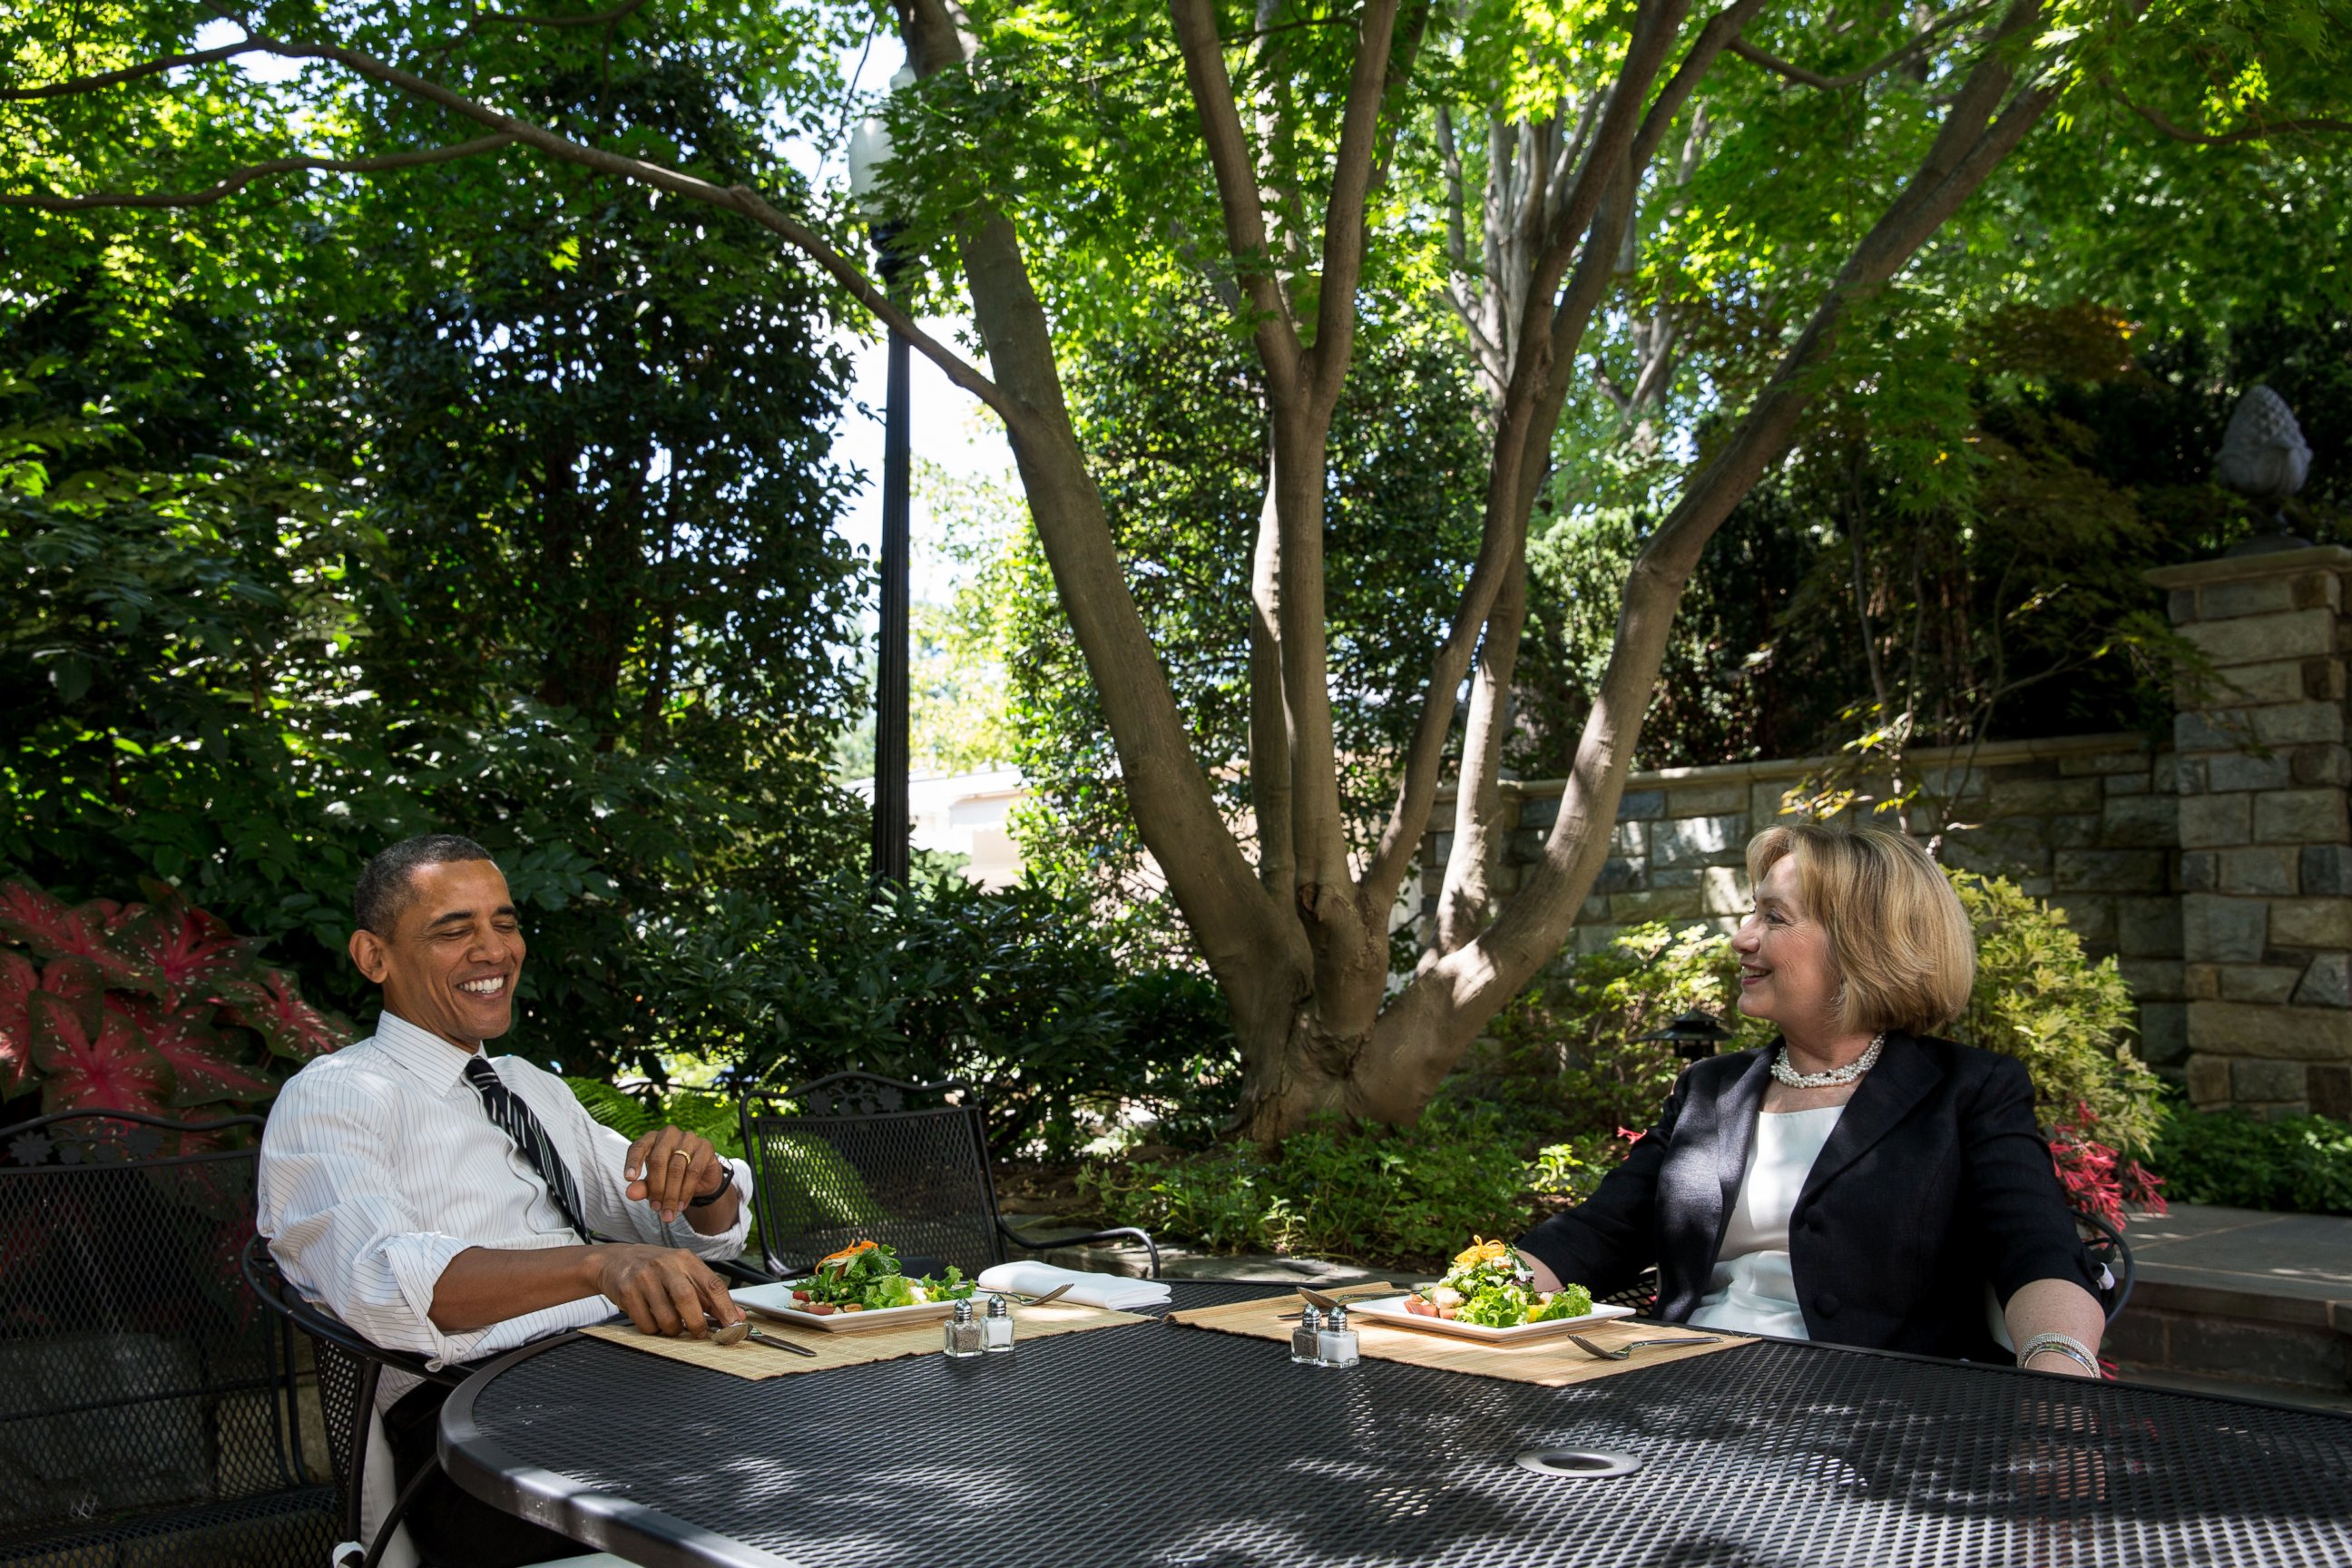 PHOTO: Barack Obama, left, and Hillary Rodham Clinton, right, are pictured at the White House on July 29, 2013 in Washington, D.C.